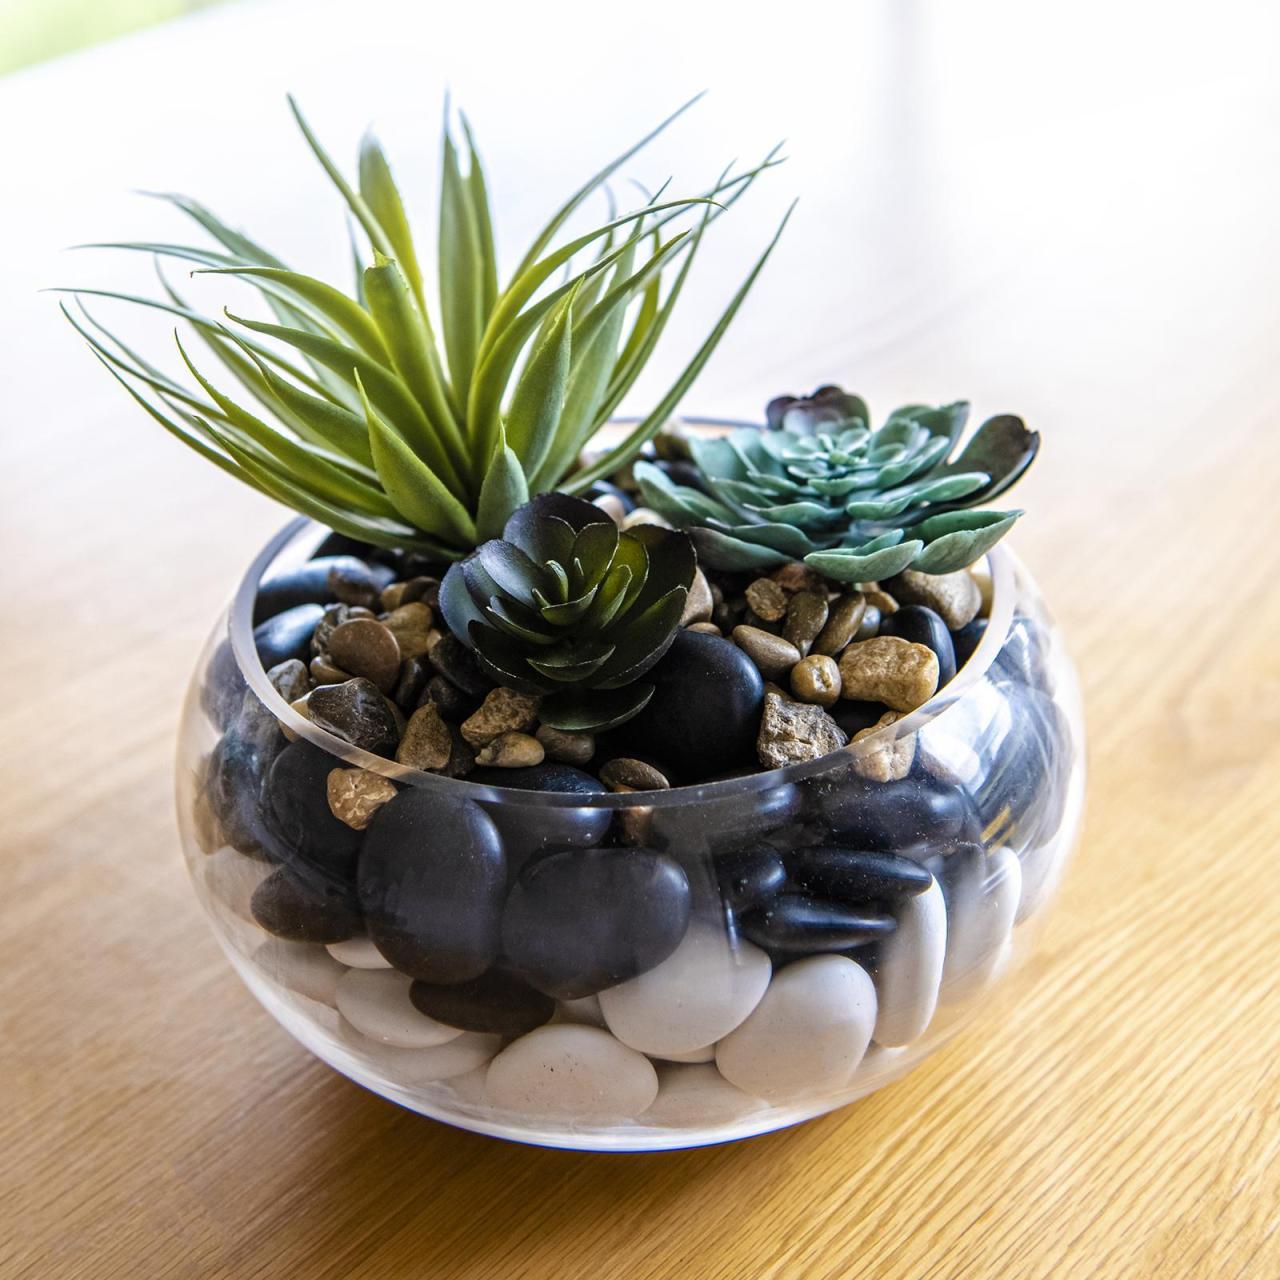 Hanging Plants Indoor | Discover the Beauty and Functionality of Bunnings Glass Planters